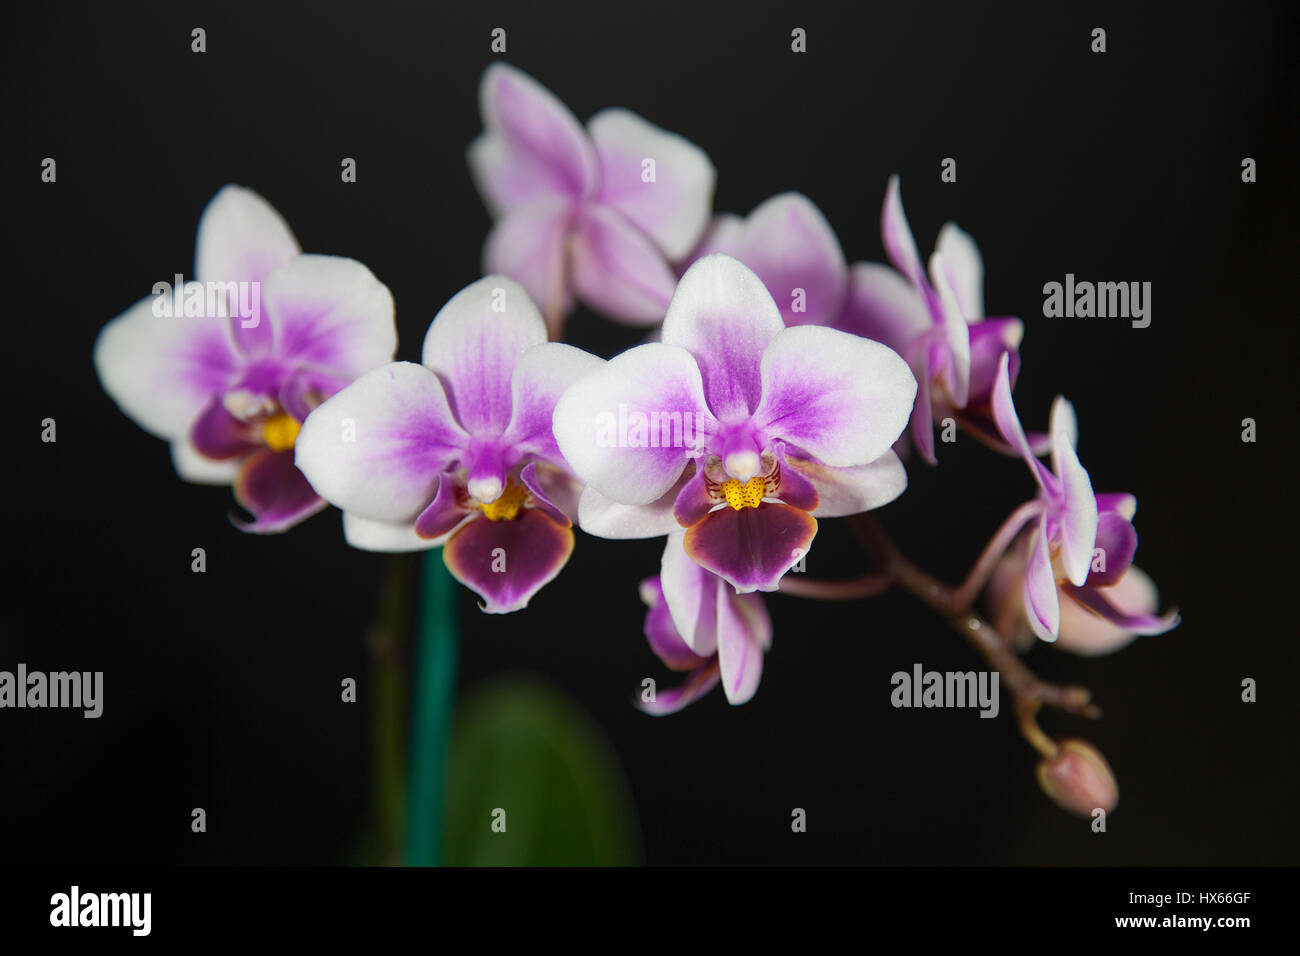 Beautiful exotic purple and white Phalaenopsis tropical orchid flowers isolated on black background. Stock Photo